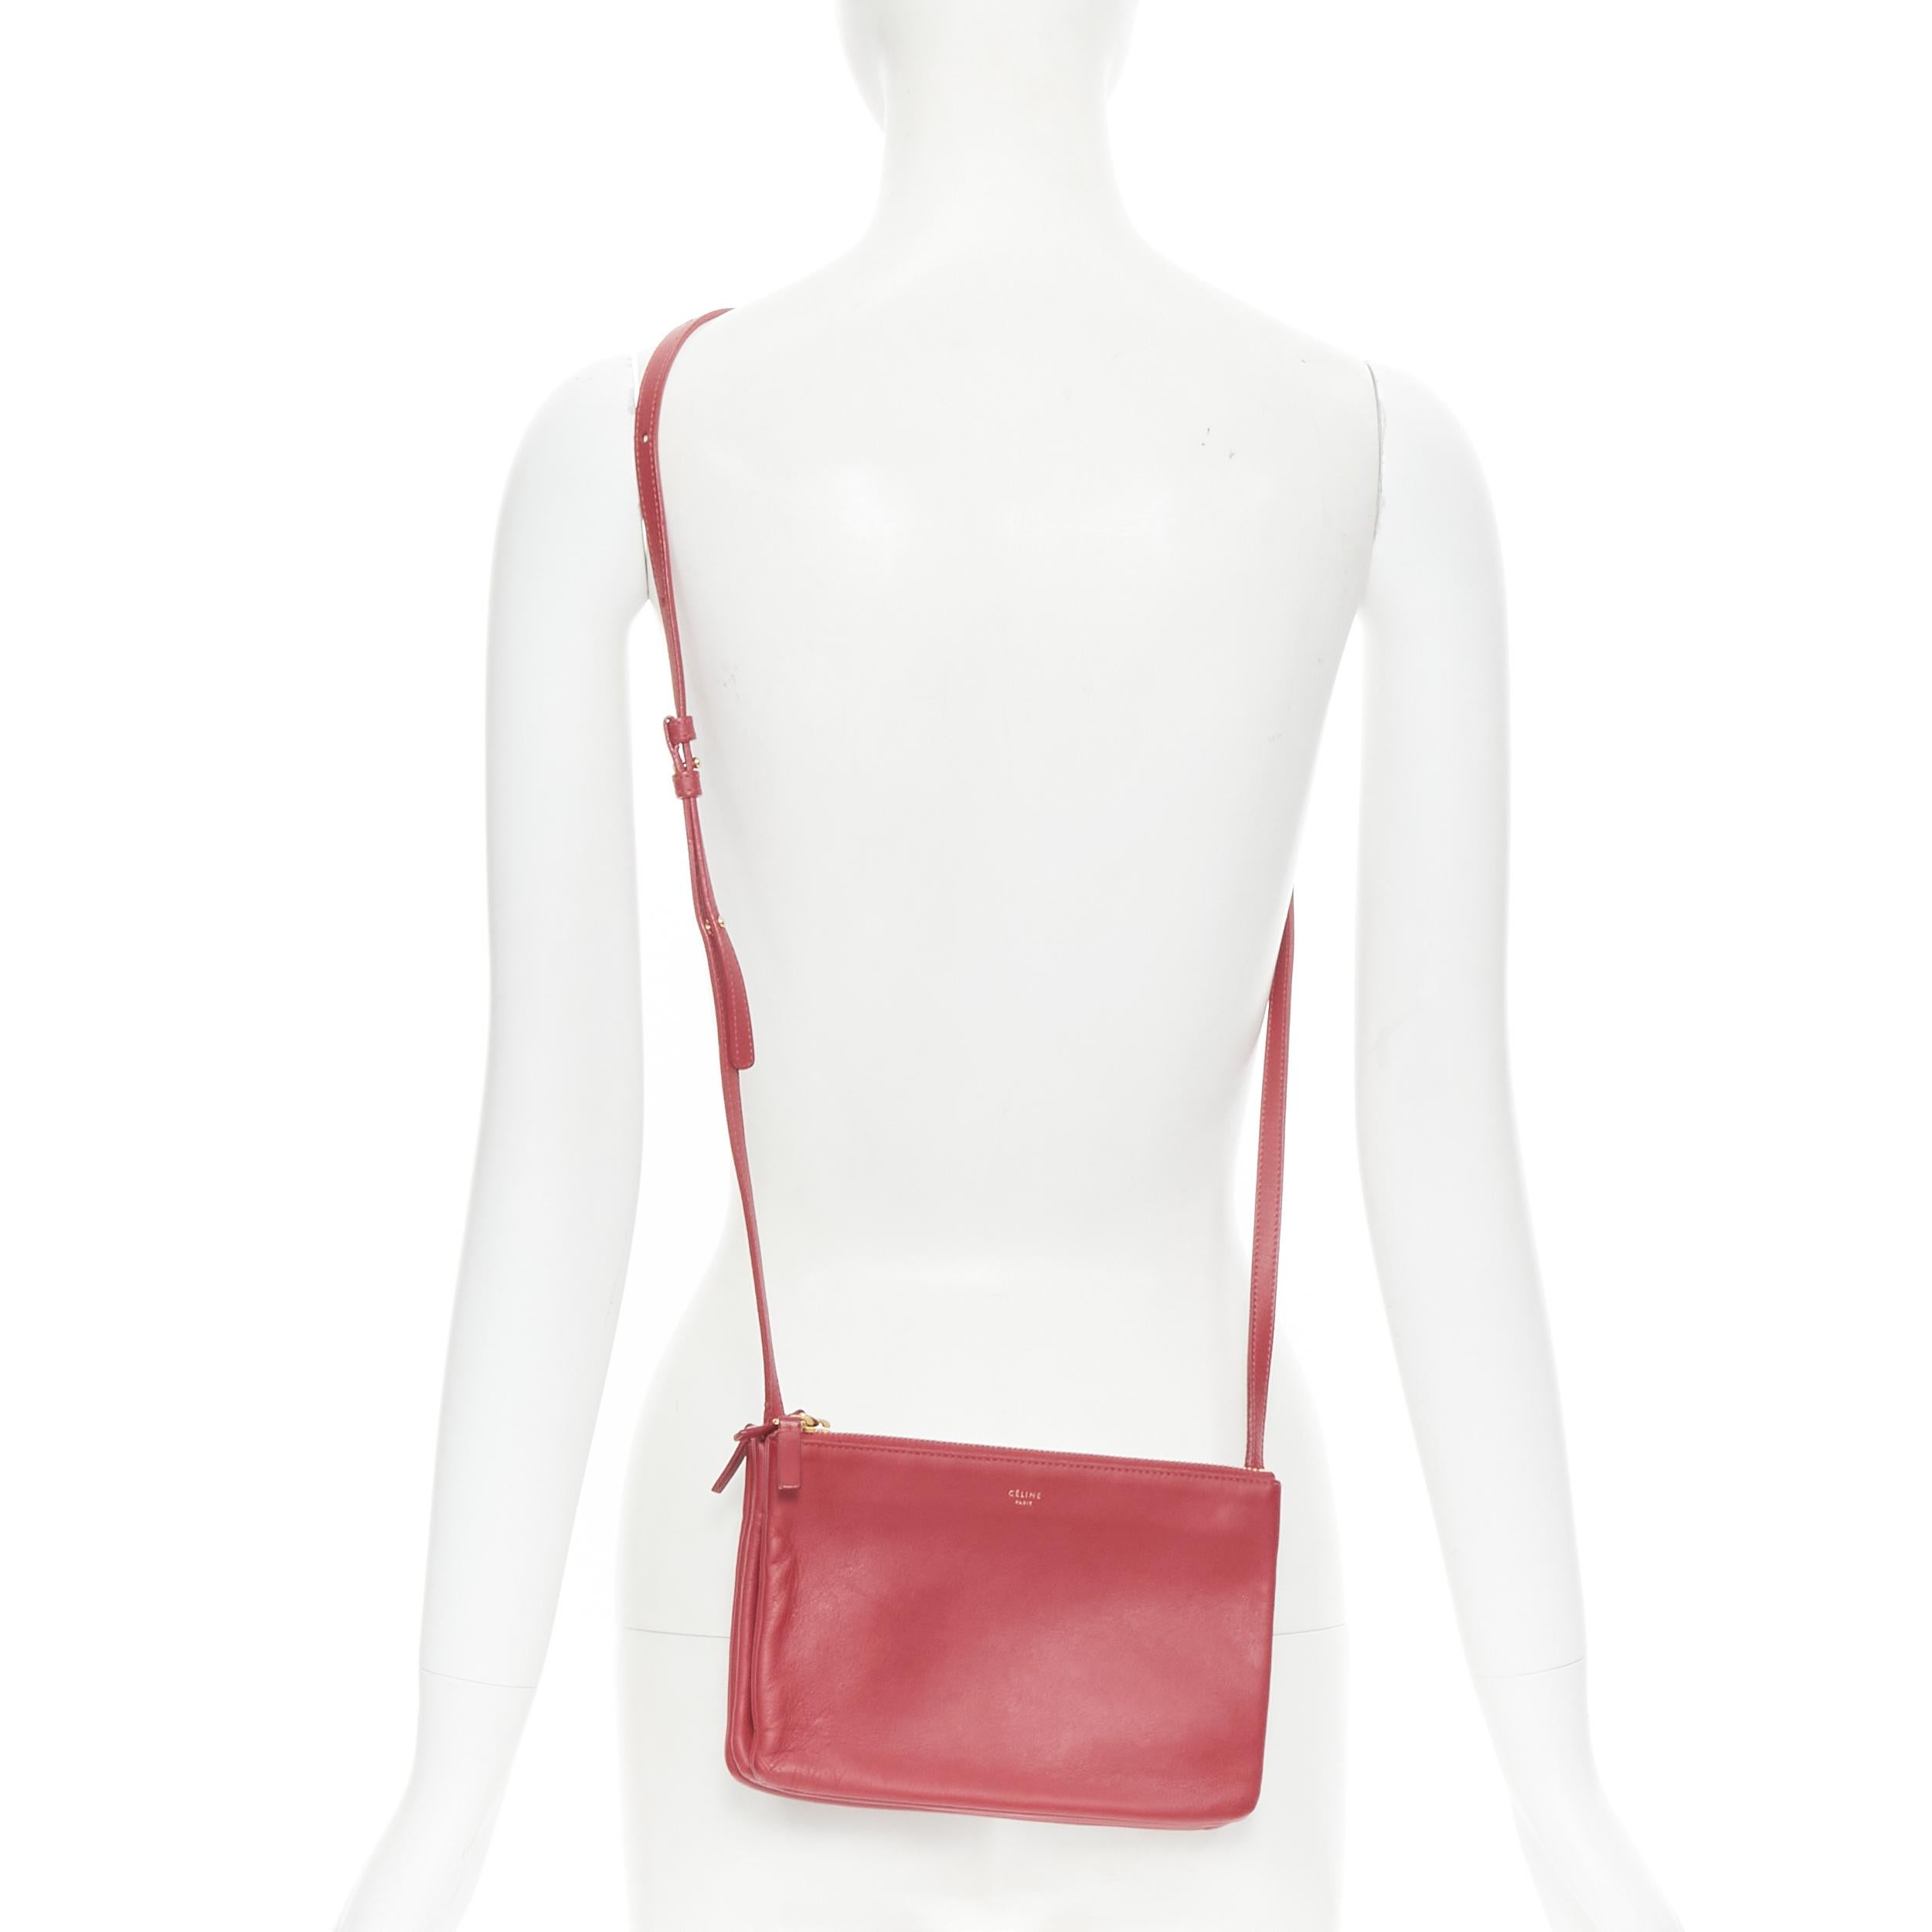 OLD CELINE Phoebe Philo Trio red gold zip triple snap pouch crossbody bag 
Reference: TALI/A00003 
Brand: Celine 
Designer: Phoebe Philo 
Model: Trio crossbody 
Material: Leather 
Color: Red 
Pattern: Solid 
Closure: Zip 
Extra Detail: Trio